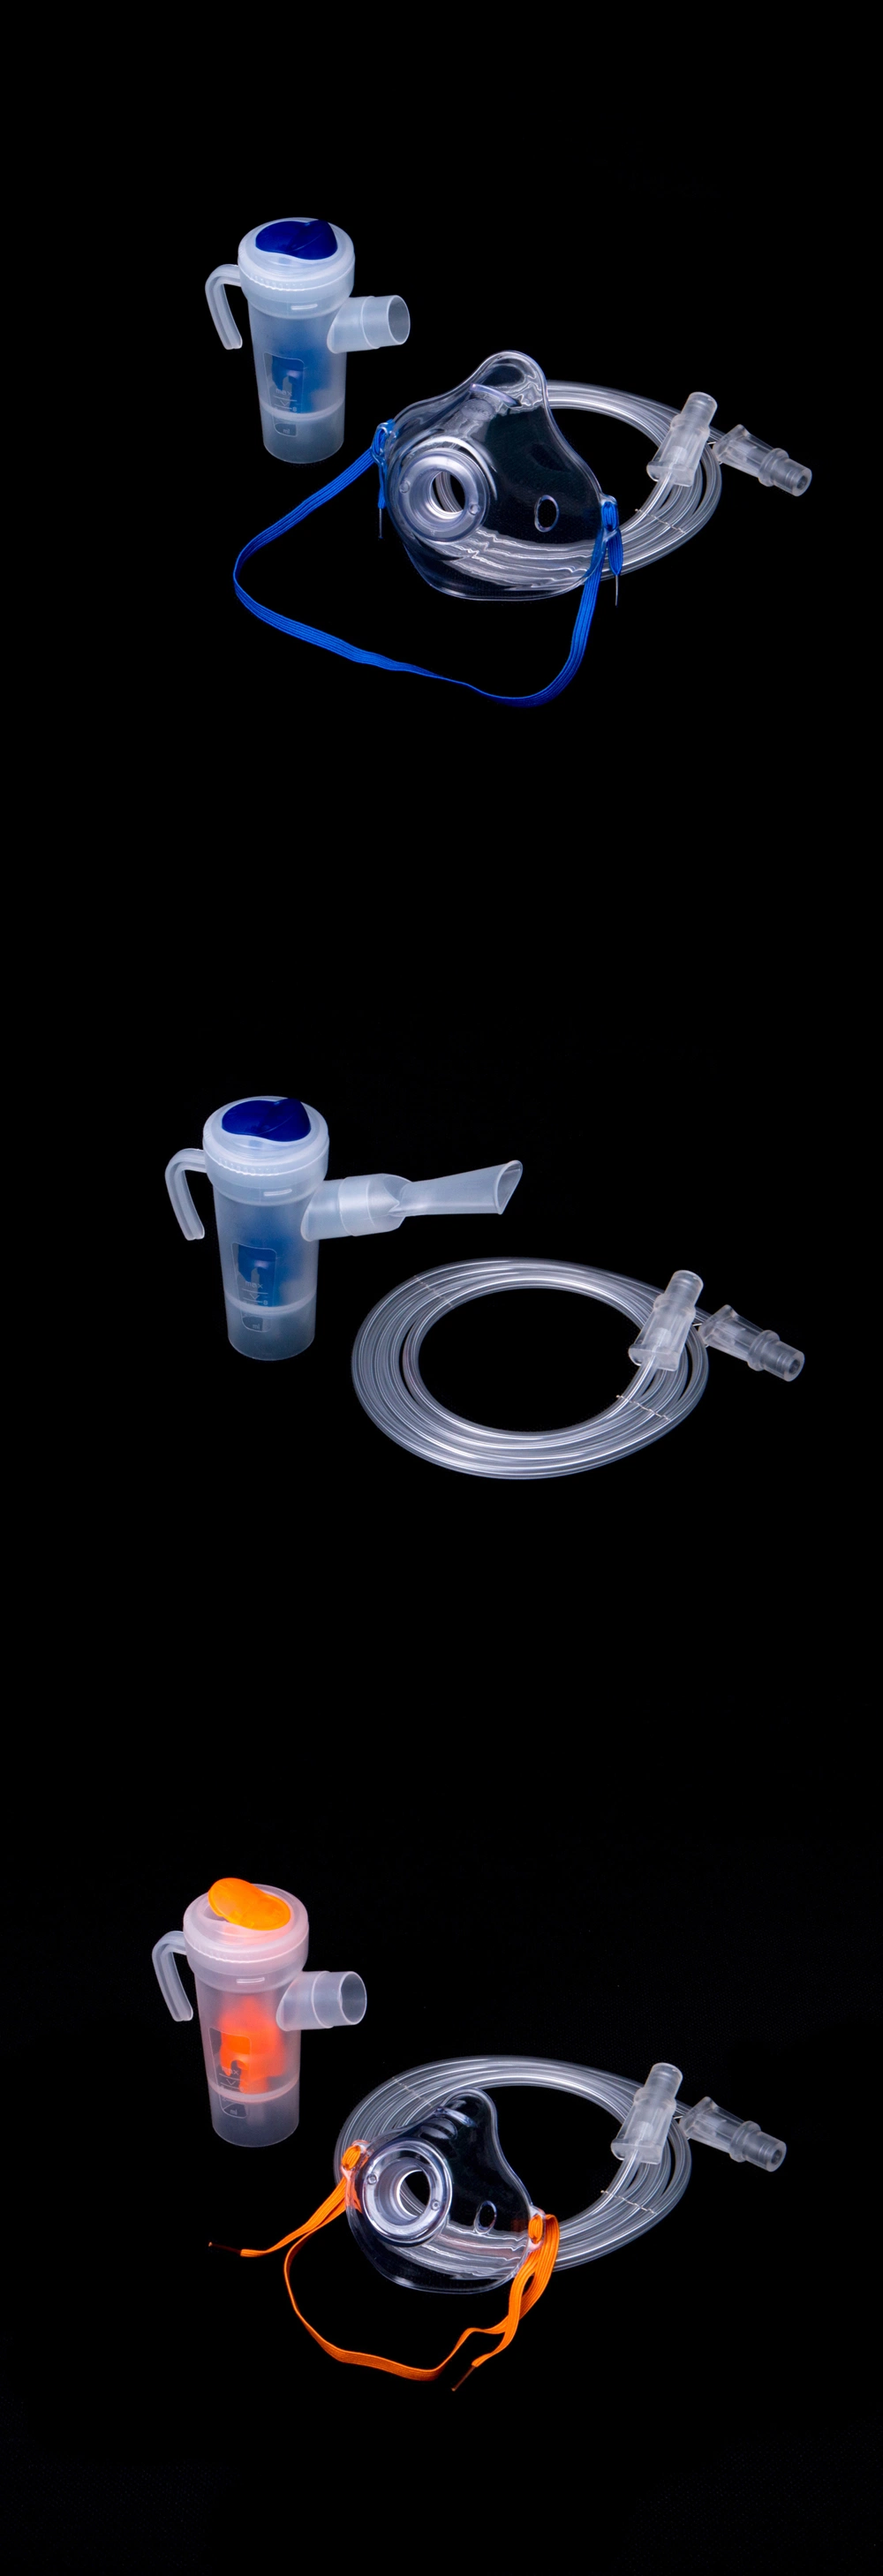 CE/ISO Nebulizer Cup Factory Nebulizer Chamber Nebulizer Cup Hospital and Home Use Nebulizer Cup Kit Nebulizer with Button Kit Nebulizer Oxygen Kit with Mask